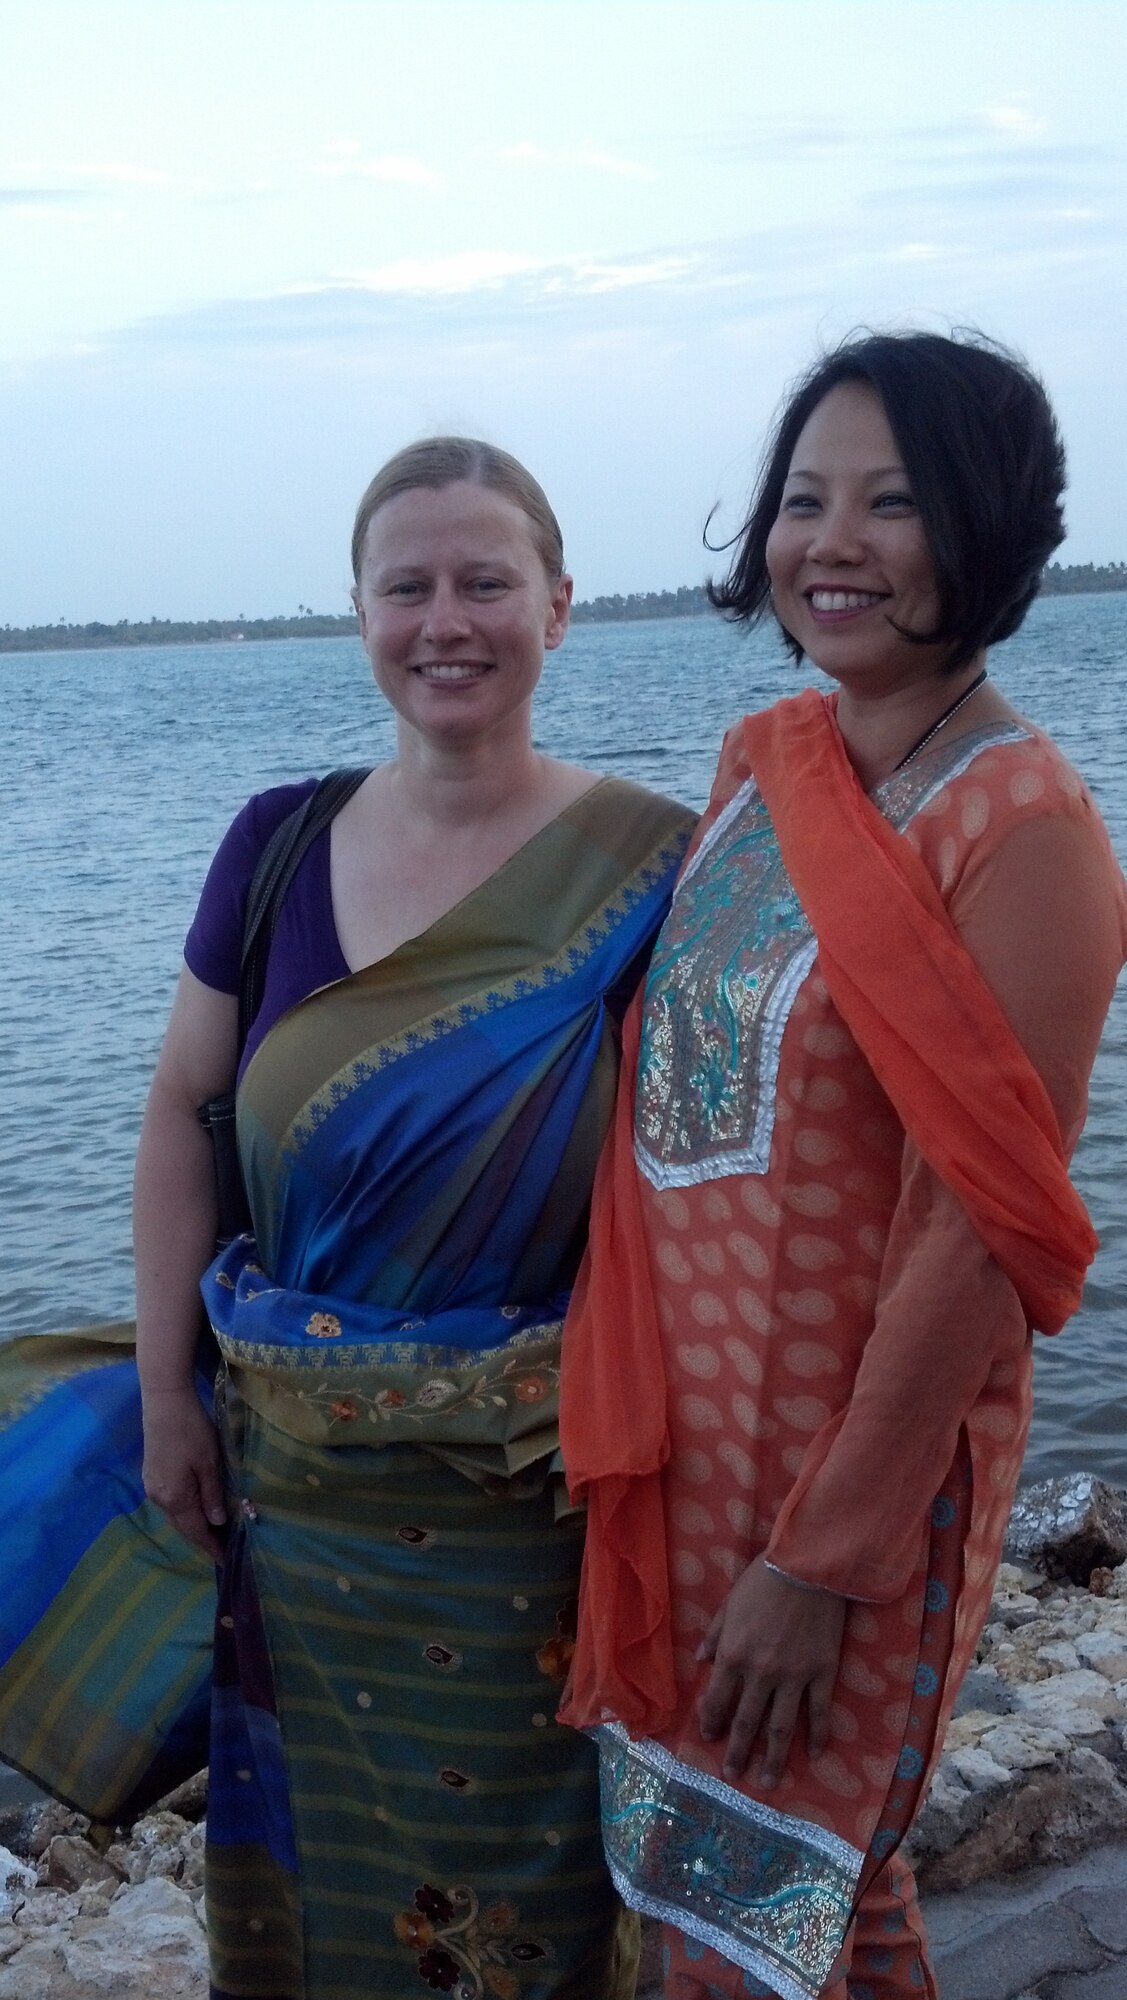 Dr. Erika Petrik, a family pratice doctor from Hawaii and Lt. Col. Thuy Tran wear some of the traditional clothing during the cultural celebration as part of the Pacific Angel Mission, Jaffna Peninsula of Sri Lanka, July 28-Aug.18, 2013. (photo courtesy of Master Sgt. Dana Furnia, 142nd Fighter Wing Medical Group)